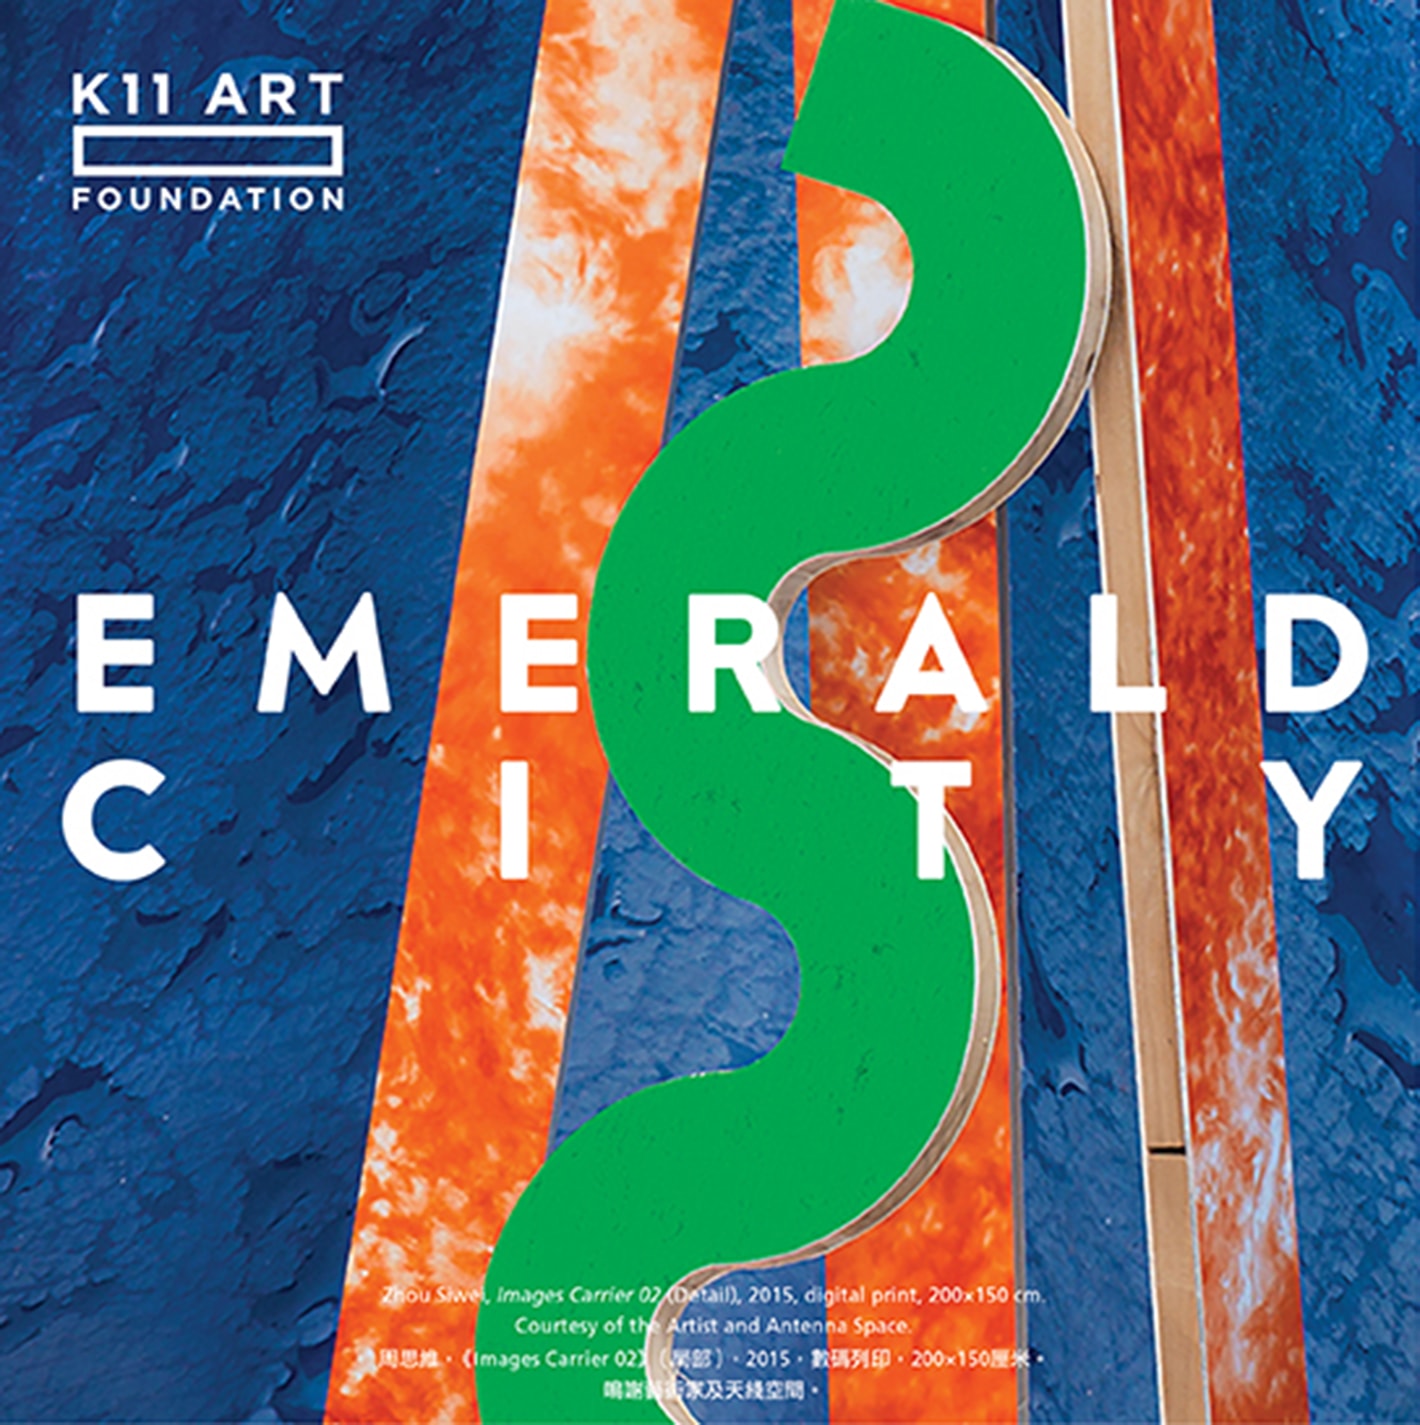 Trevor Yeung participates in K11 group exhibition “Emerald City”